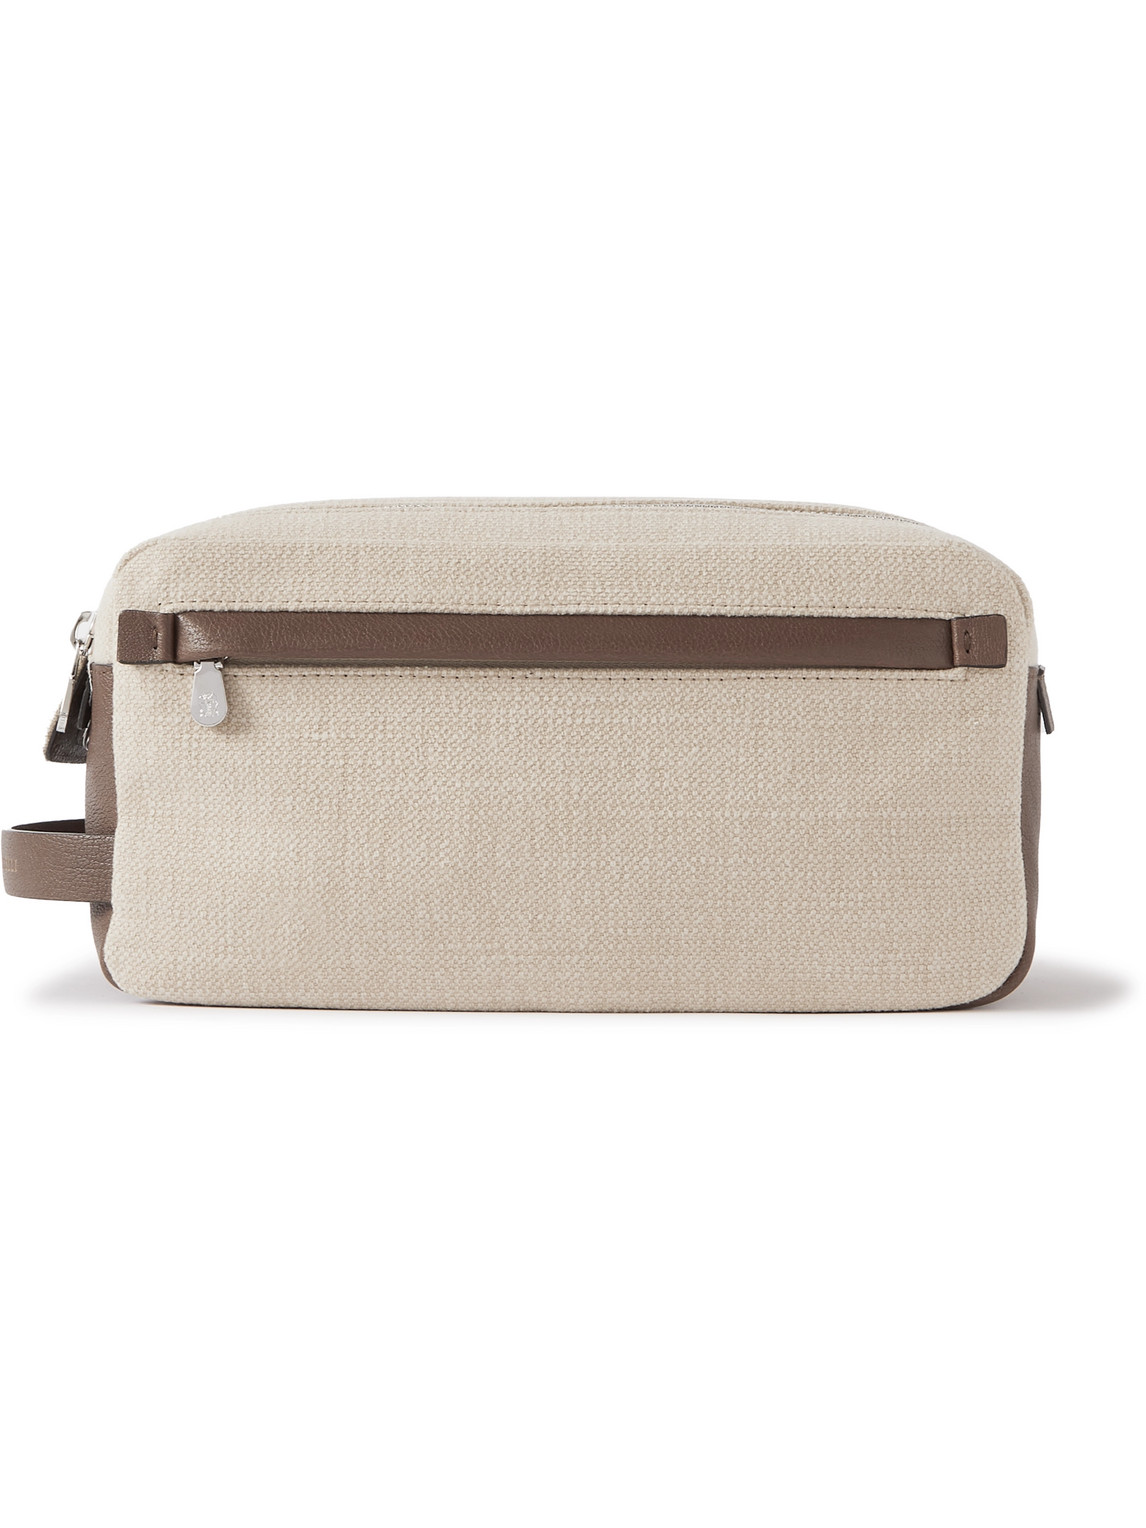 Brunello Cucinelli Leather-trimmed Cotton And Linen-blend Wash Bag In Burgundy